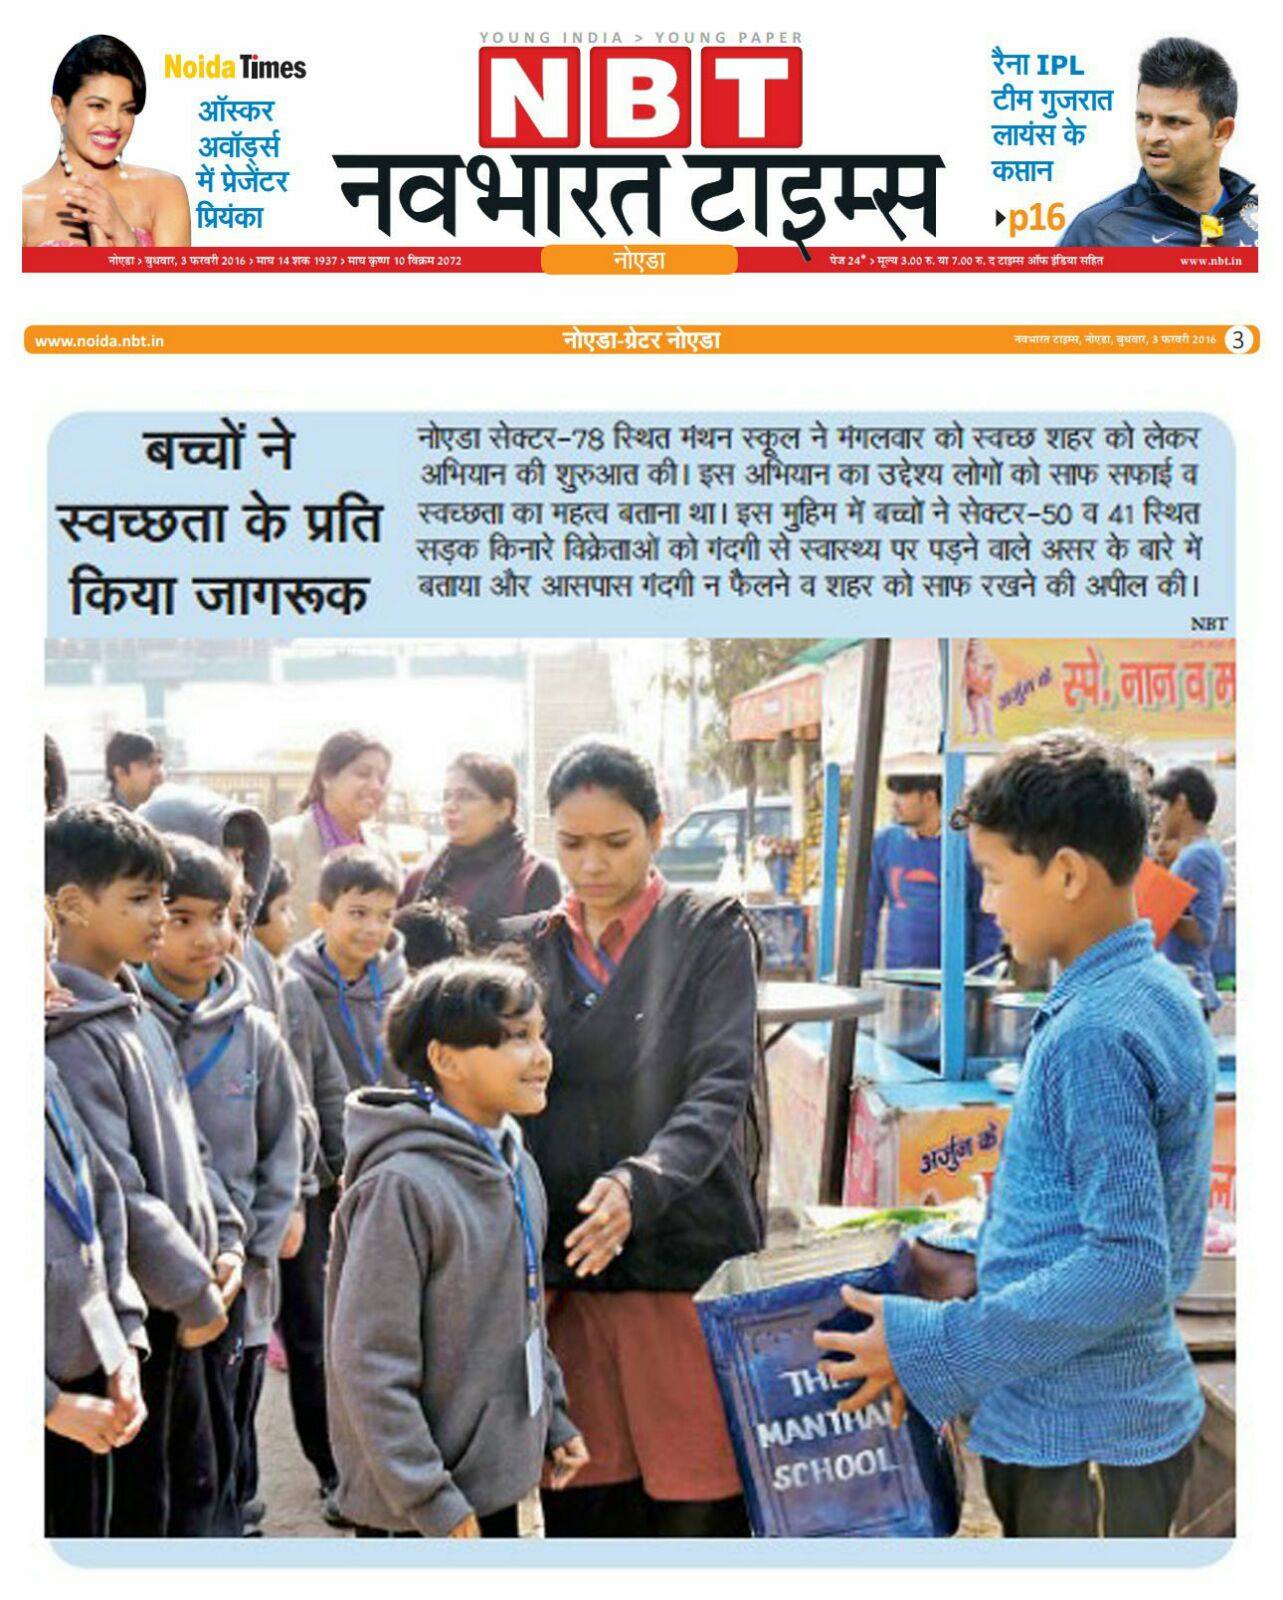 Navbharat Times Covered Clean City My Dream City initiated by The Manthan School